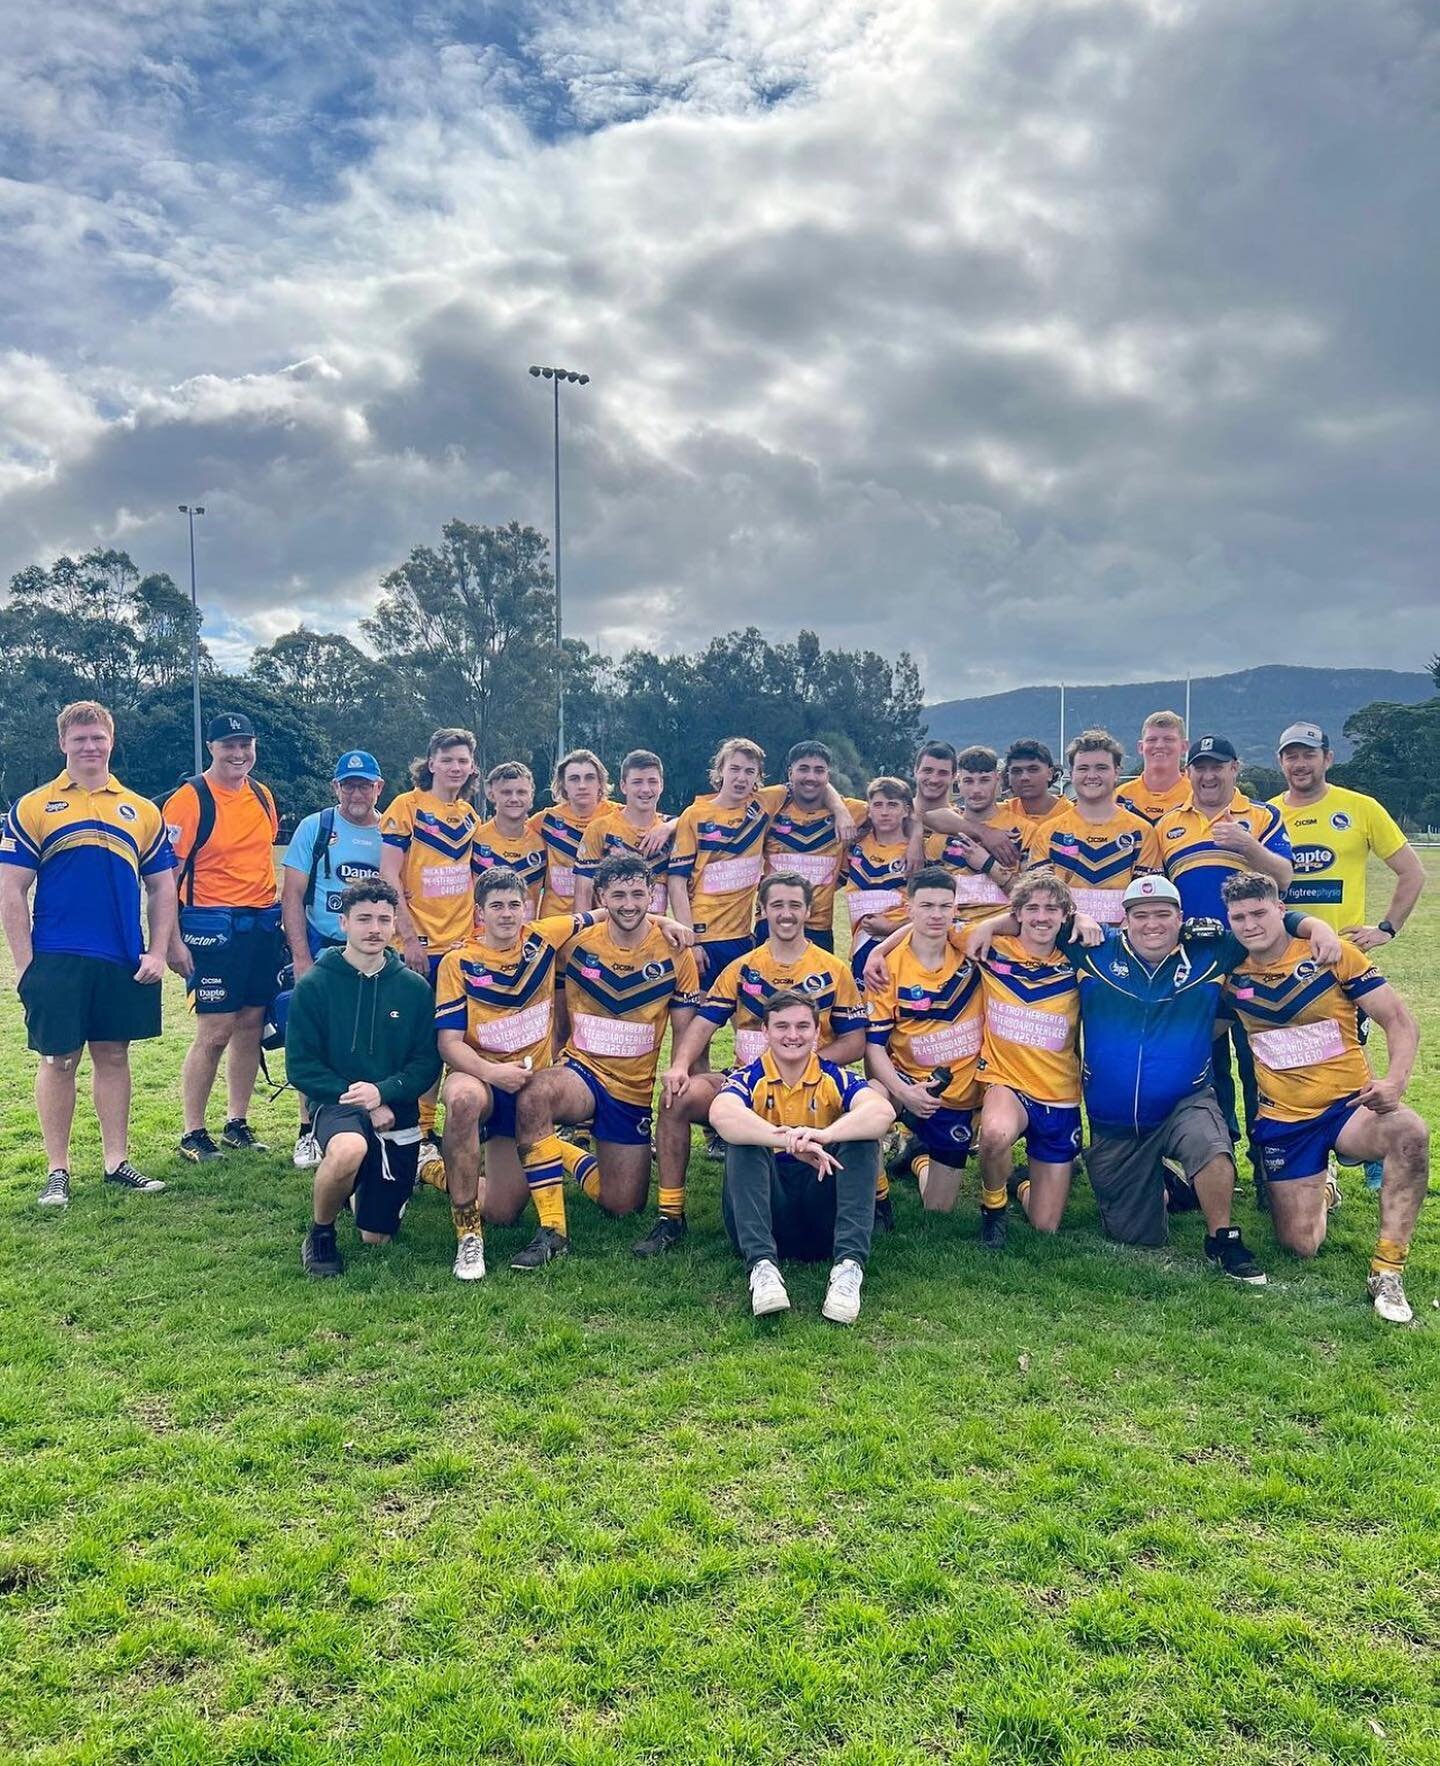 We&rsquo;d like to wish the Under 18s good luck for their Major Semi Final this Saturday at 10:30AM against Collegians at the Collegian Sports Stadium!

Rip in boys- best of luck! 🐤🔥